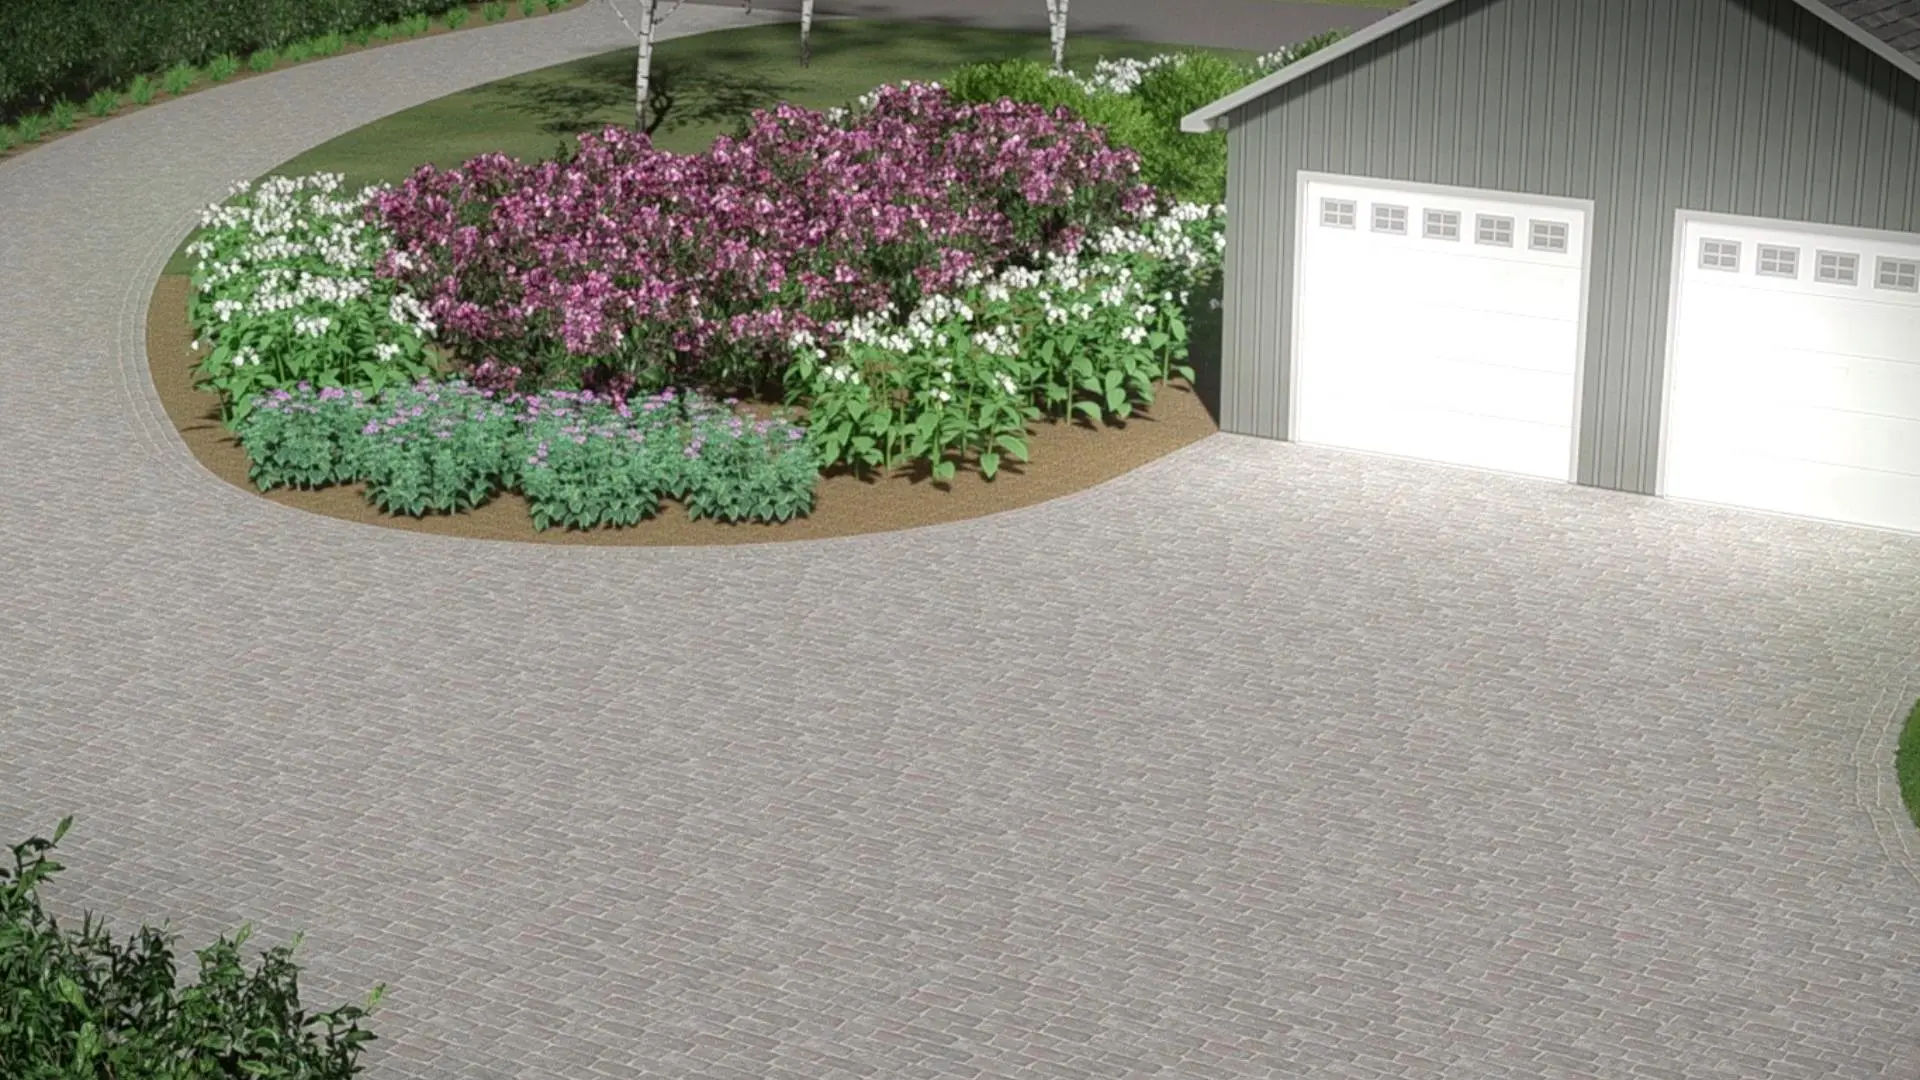 Driveway rendering for client's in Nazareth, PA.